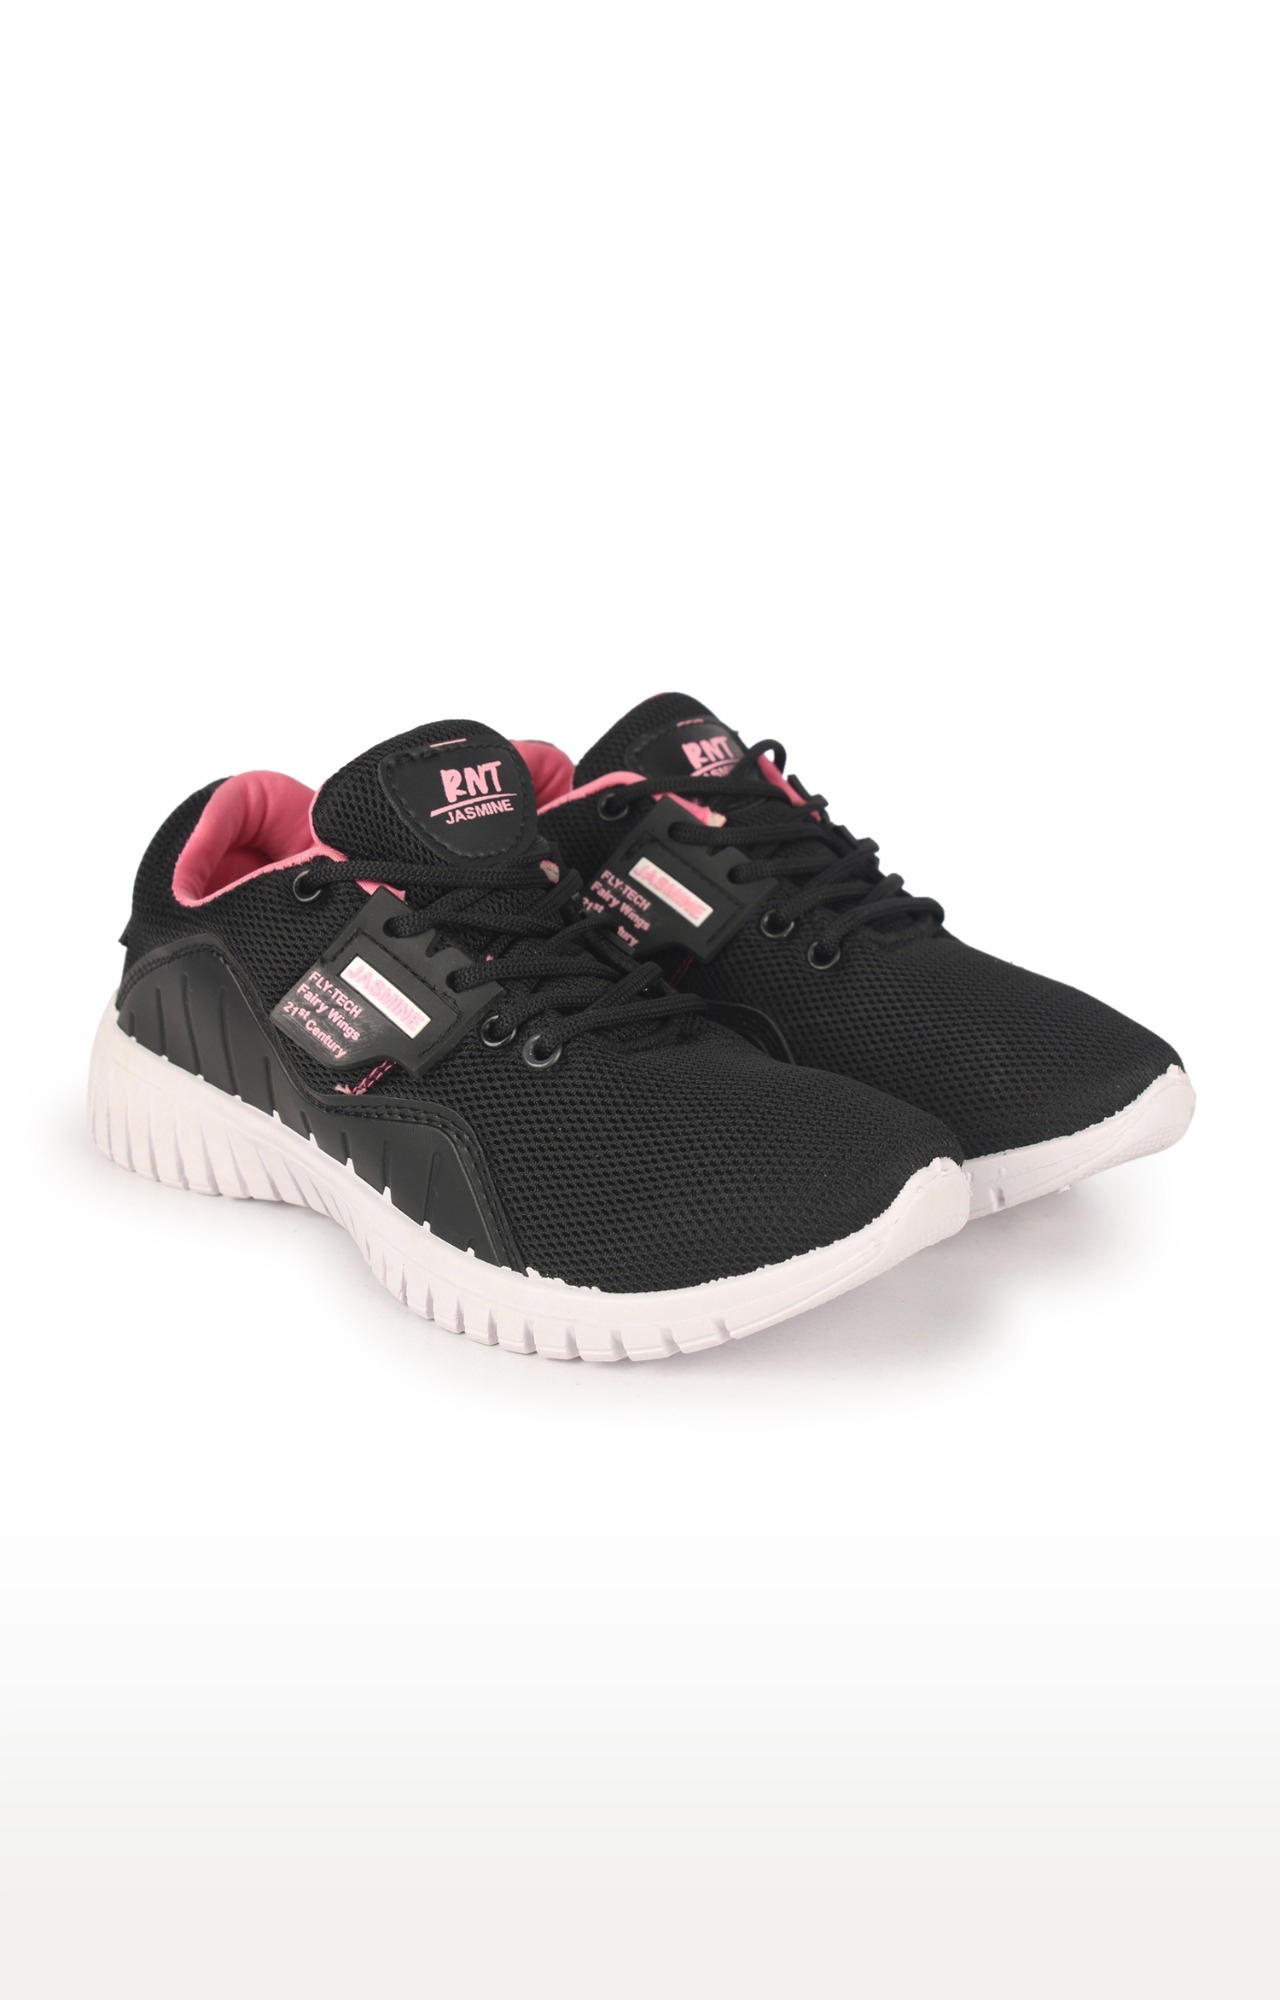 RNT | RNT Jasmine Black and Pink Shoes for Women